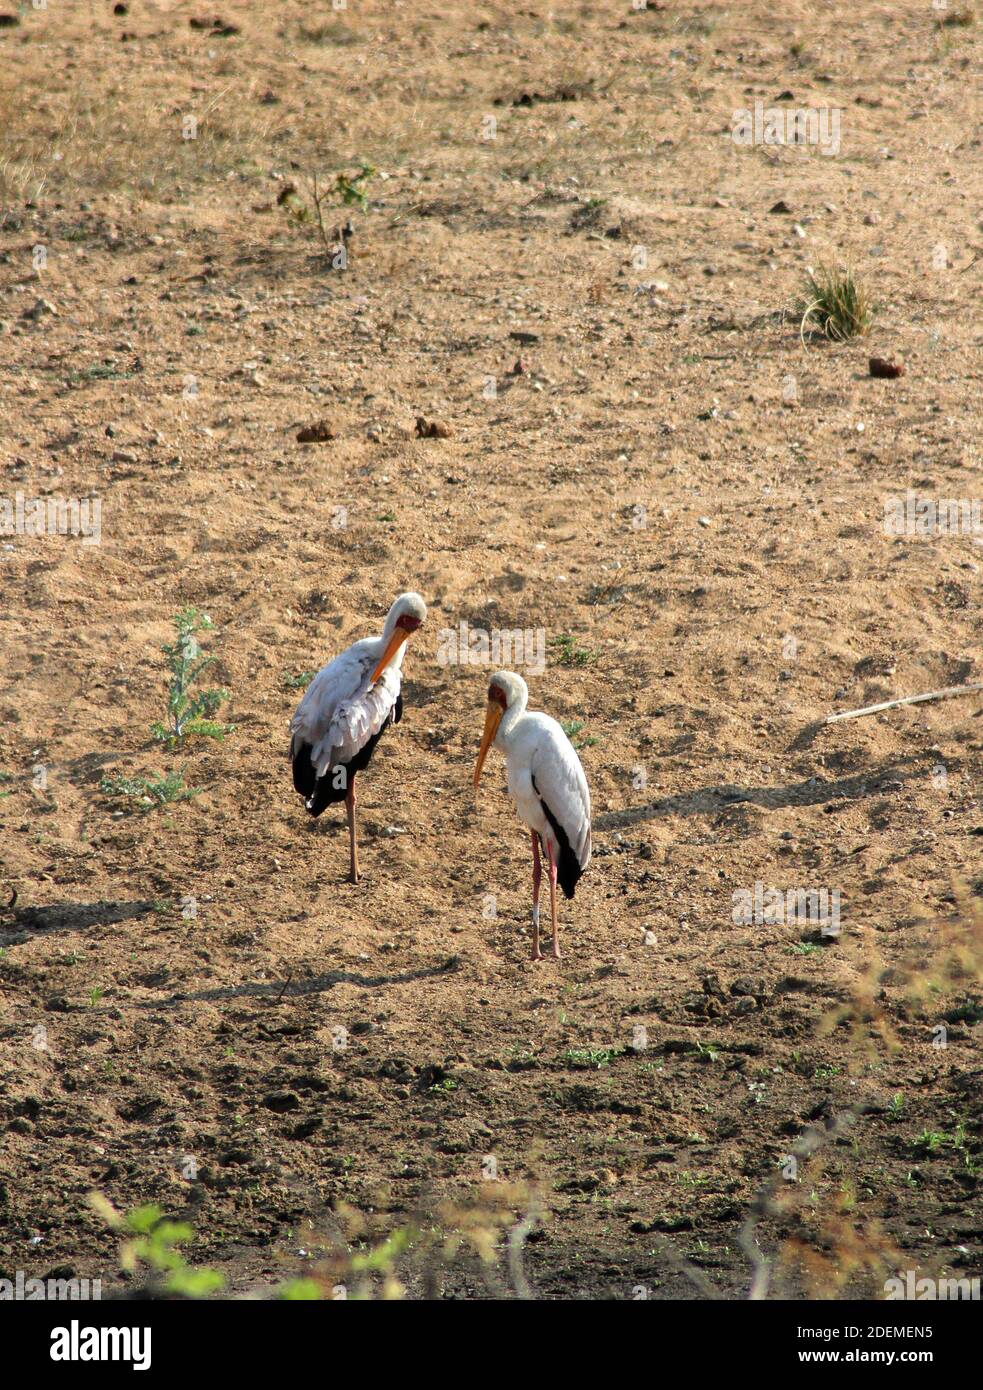 Yellow-billed stork (Mycteria ibis), Kruger National Park, South Africa Stock Photo